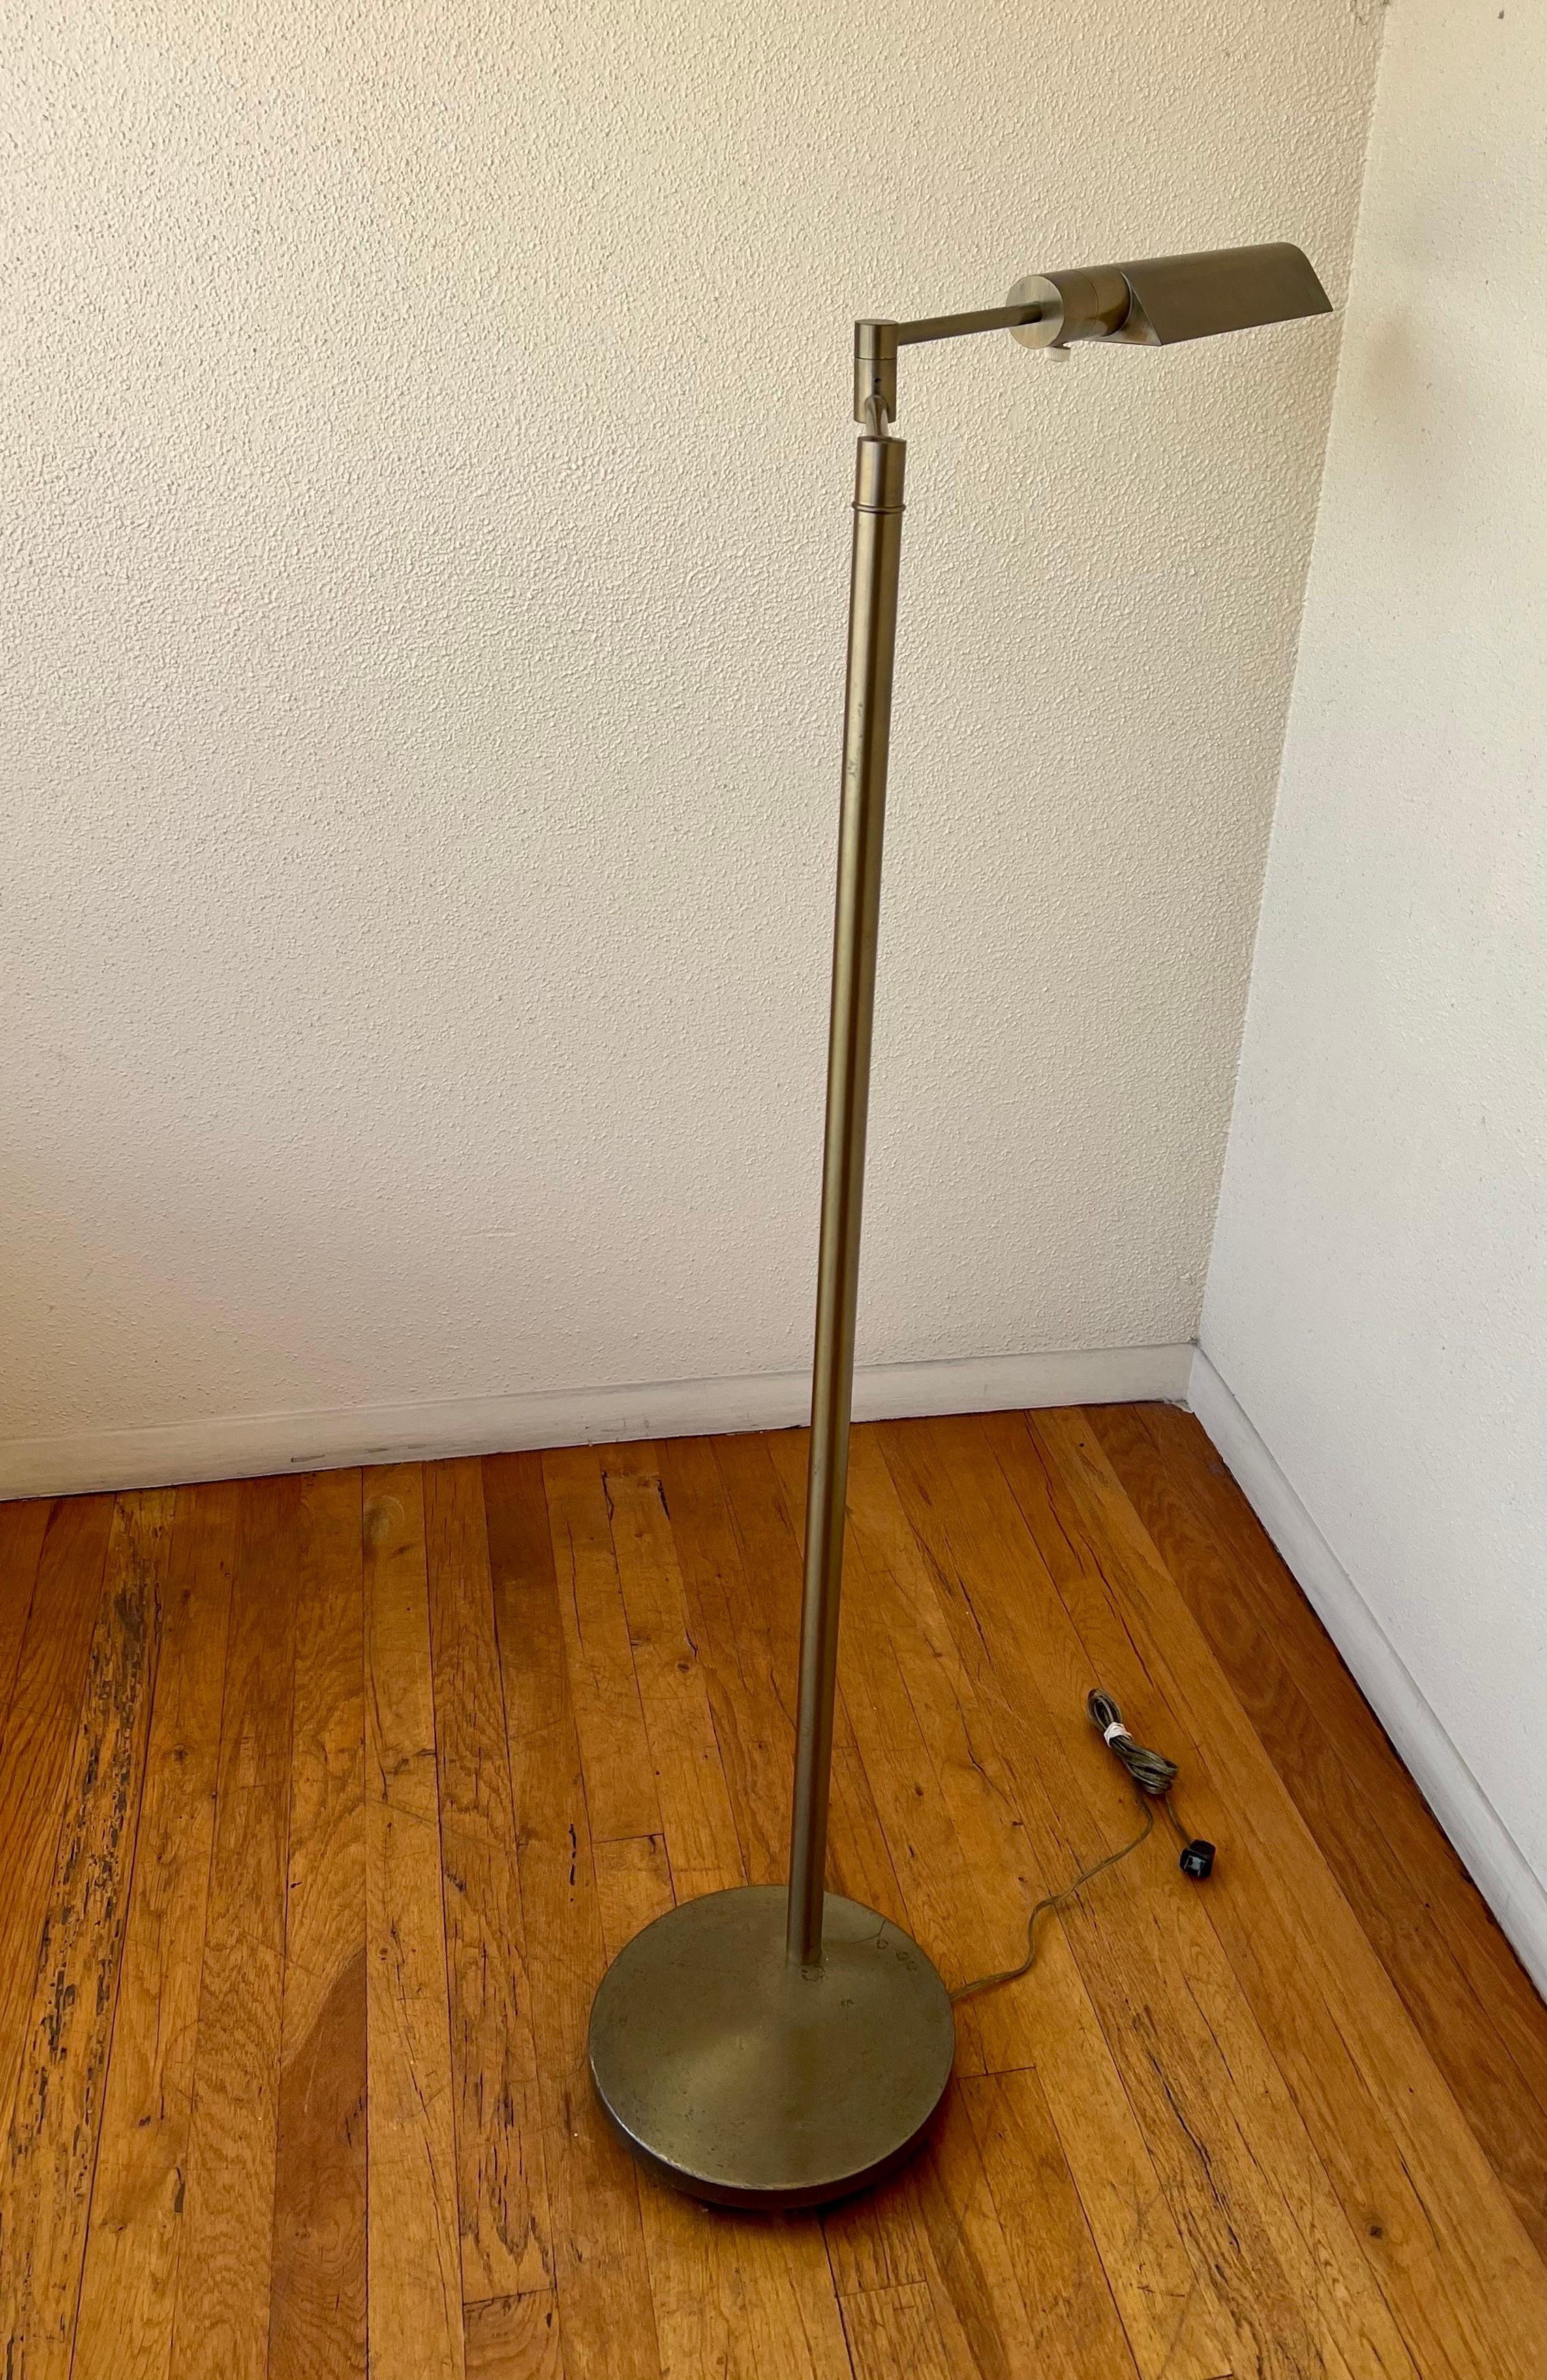 Antique Bronze Finish Multi-Directional Floor Lamp by Casella Lighting C1230 In Good Condition For Sale In San Diego, CA